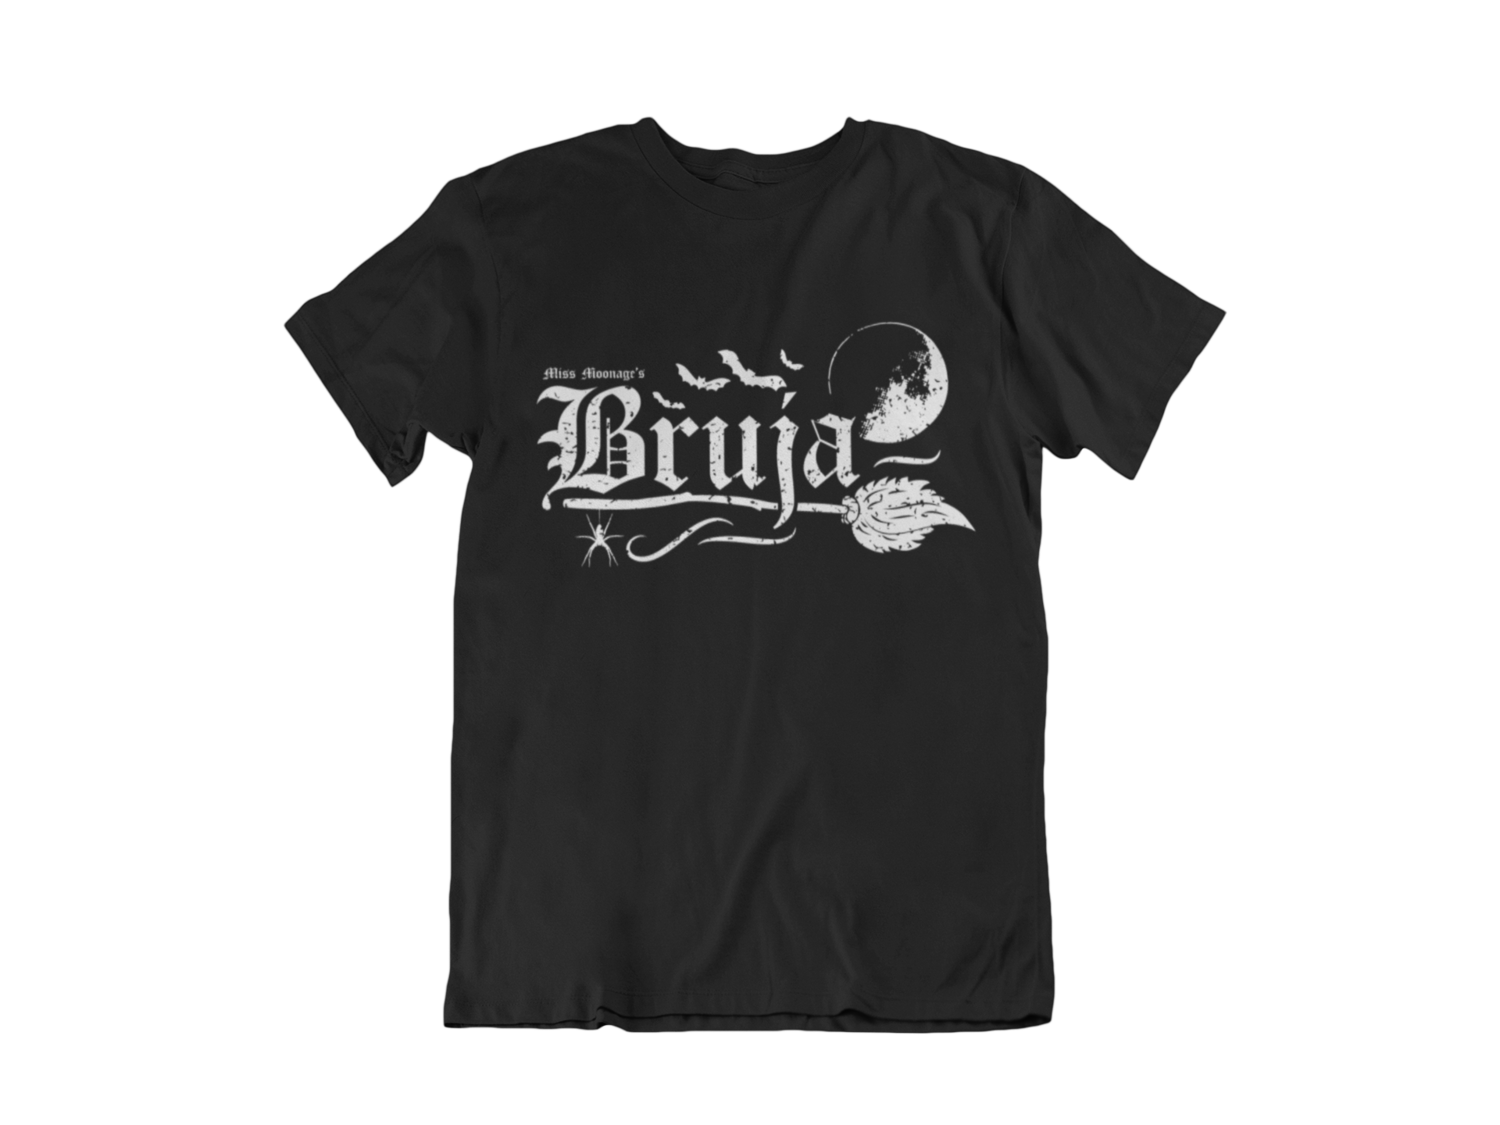 BRUJA by MISS MOONAGE tshirt for MEN